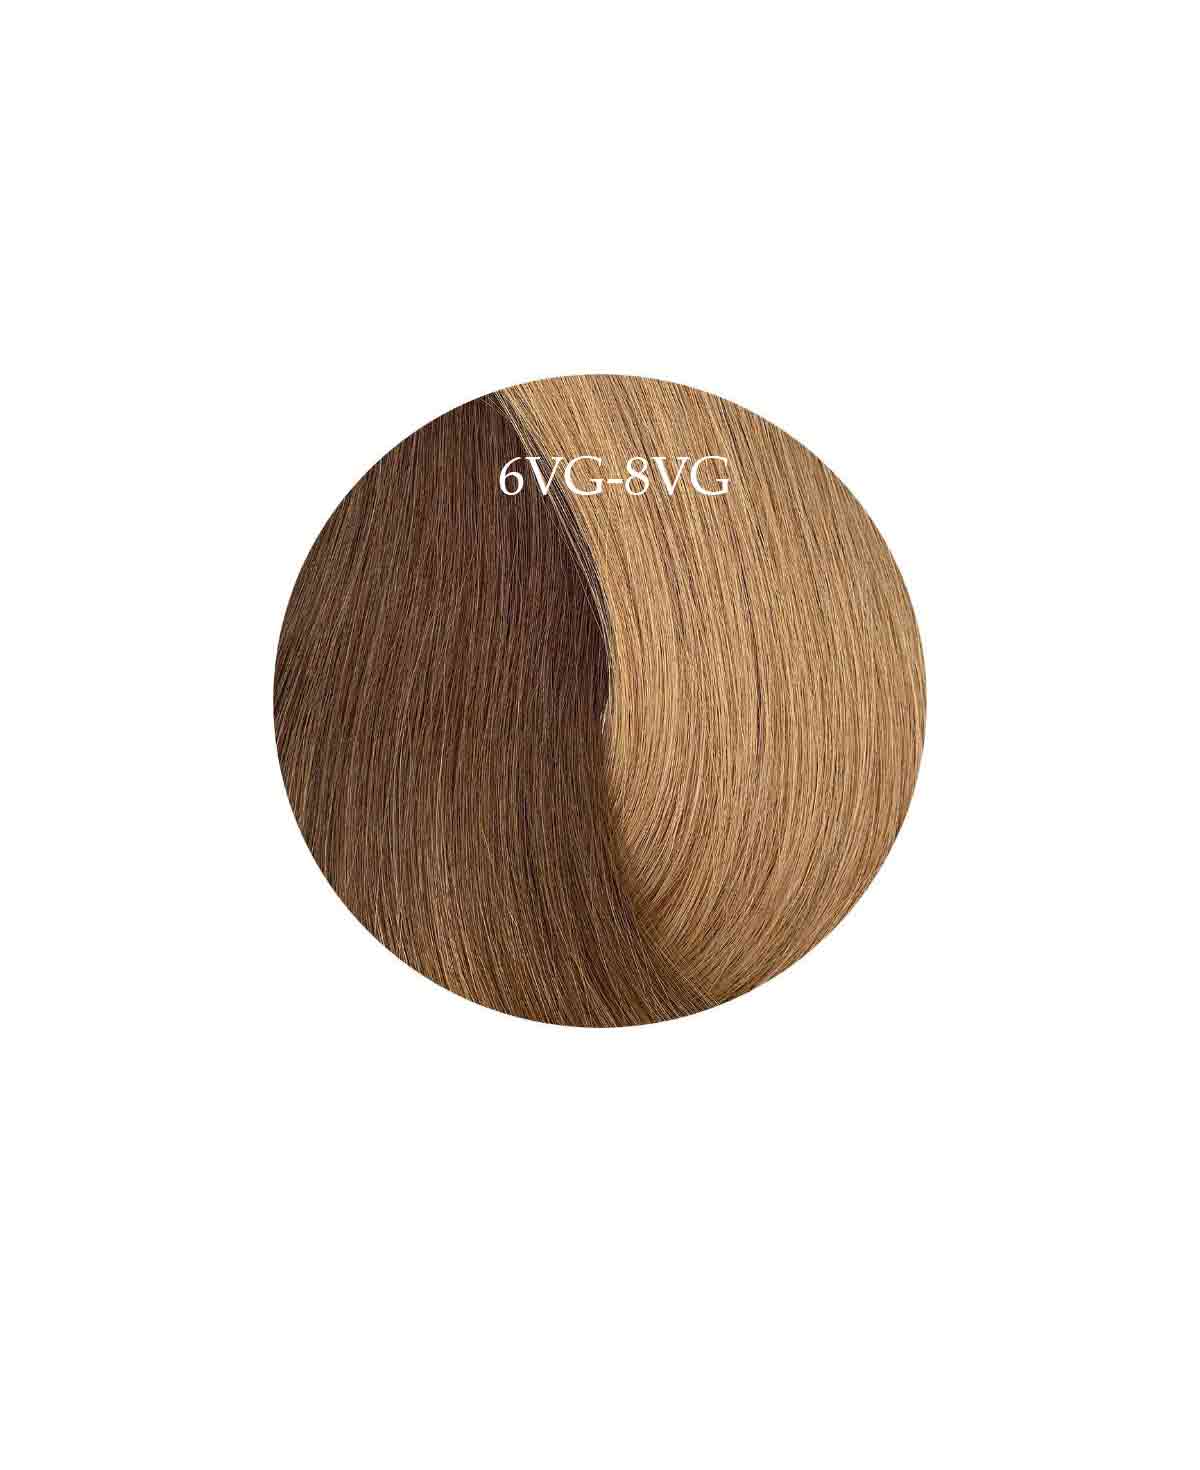 Showpony 45-50cm (20") HALO - 3 in 1 BOX SET - 6VG-8VG Ombre Cool Brown 